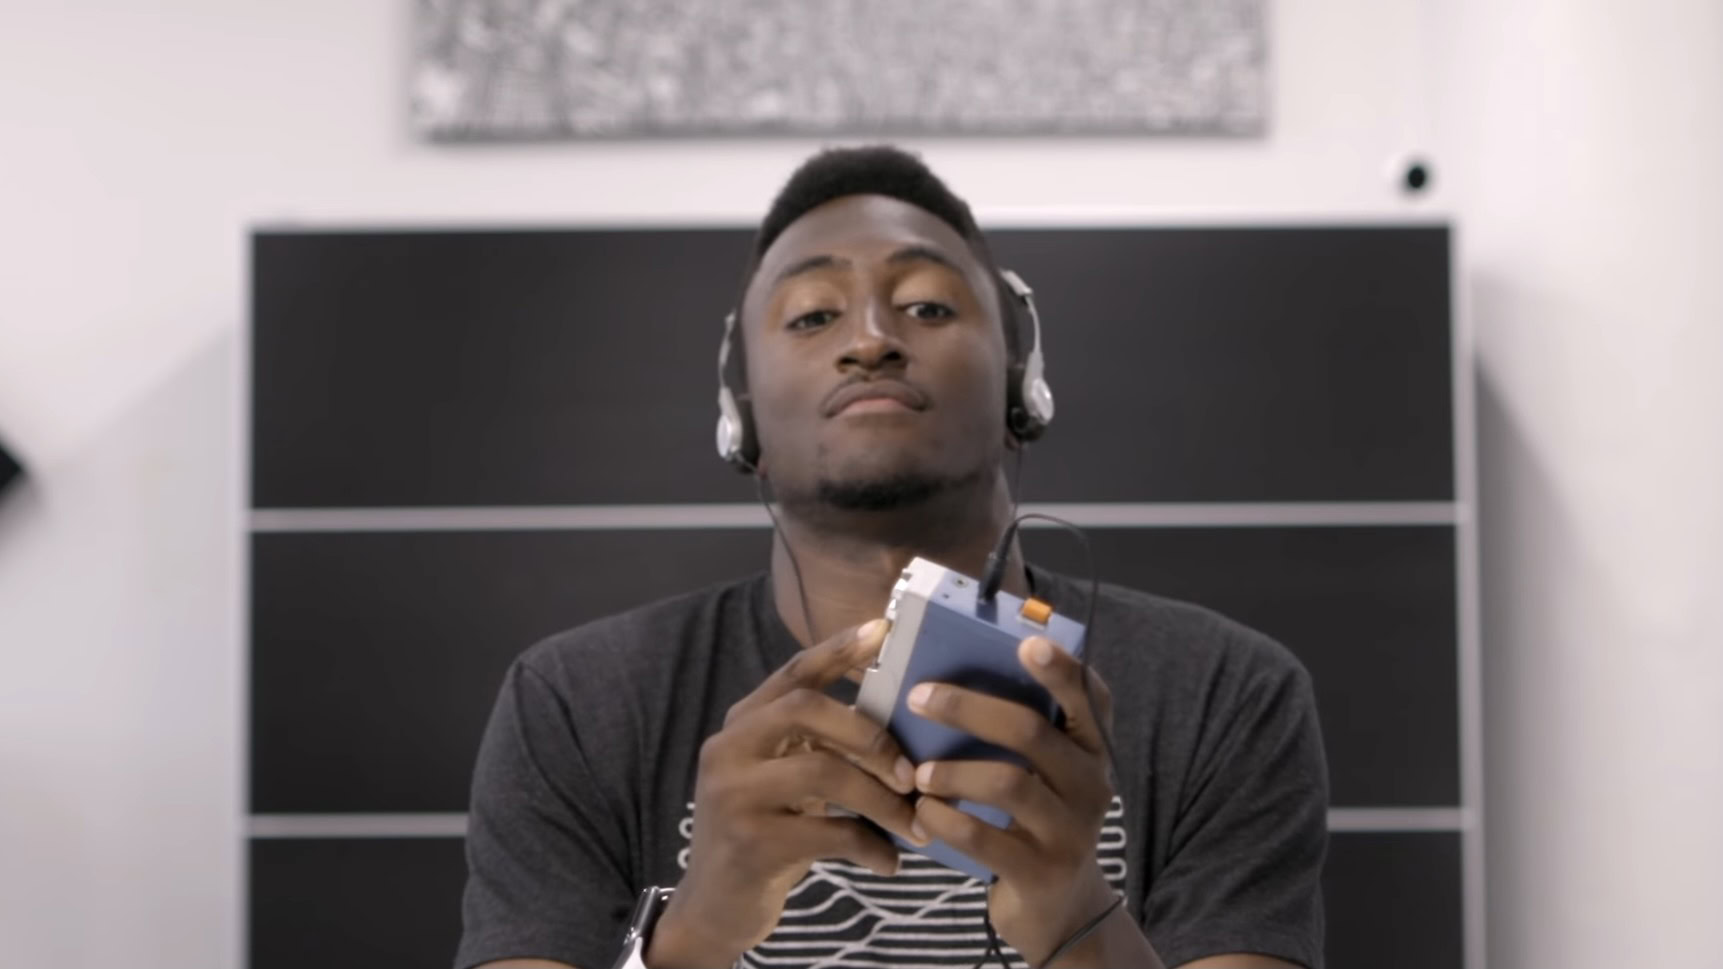 Marques Brownlee holds an old Walkman in Retro Tech